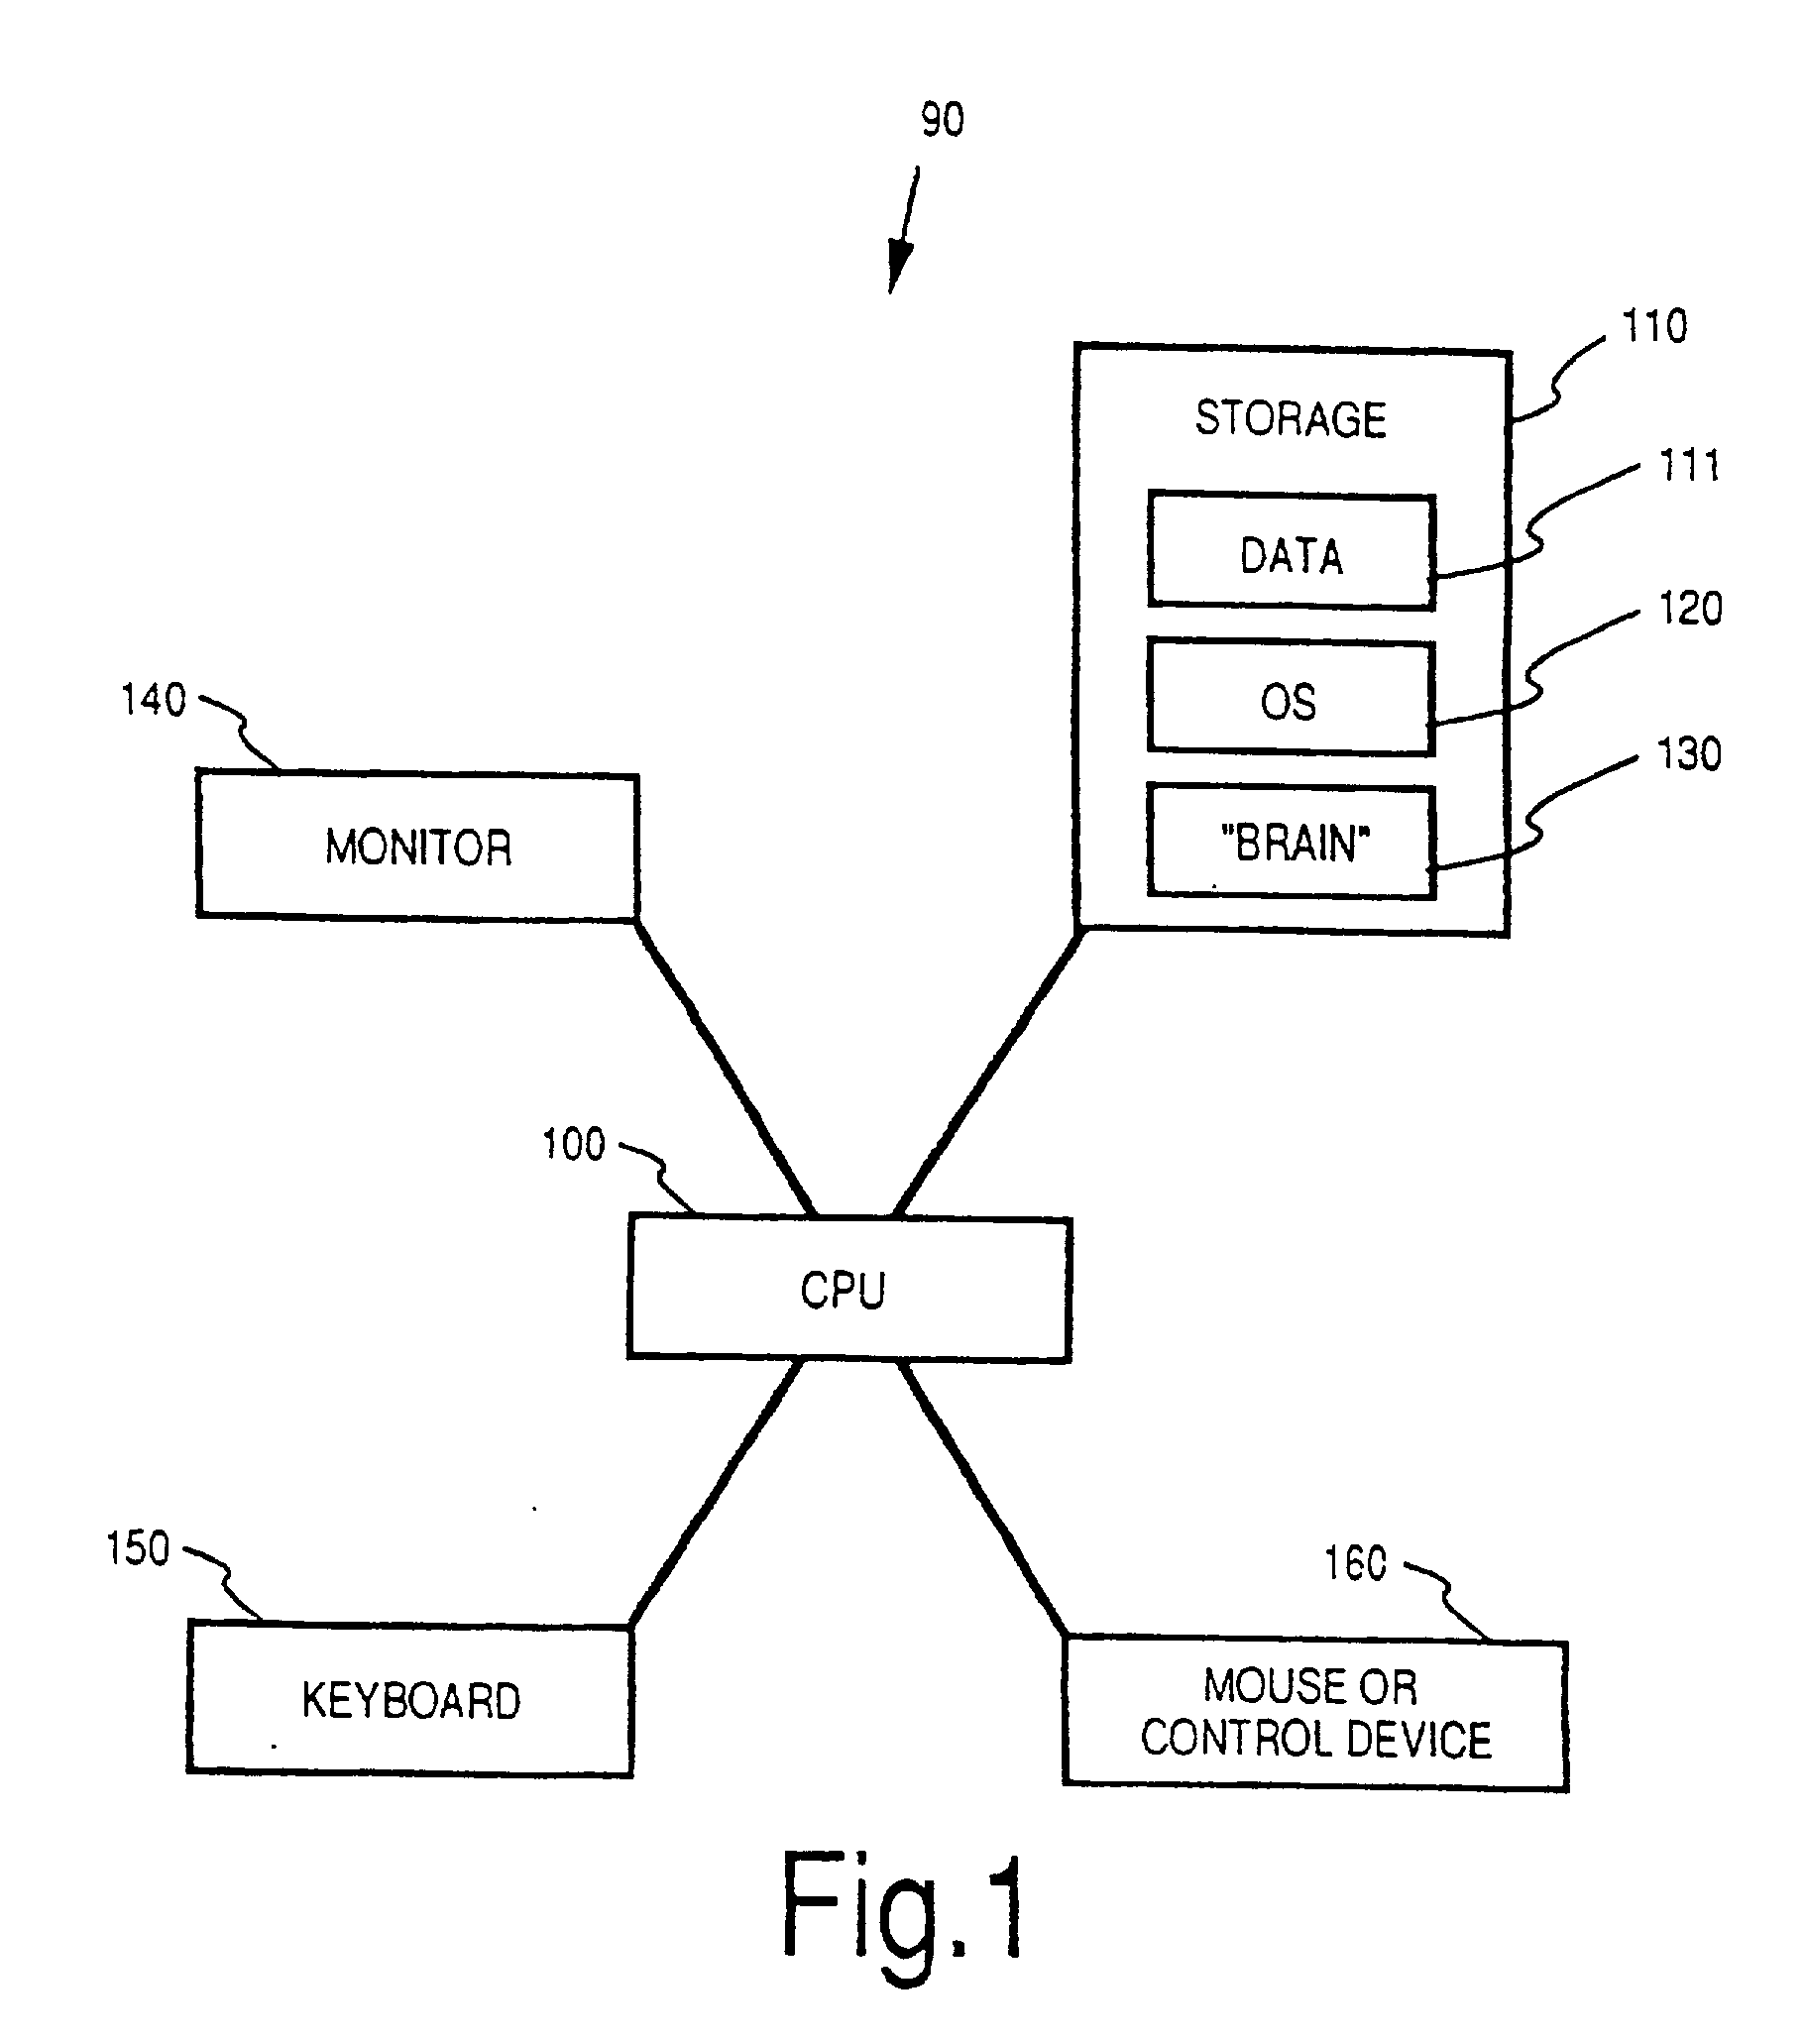 Method and apparatus for creating and accessing associative data structures under a shared model of categories, rules, triggers and data relationship permissions